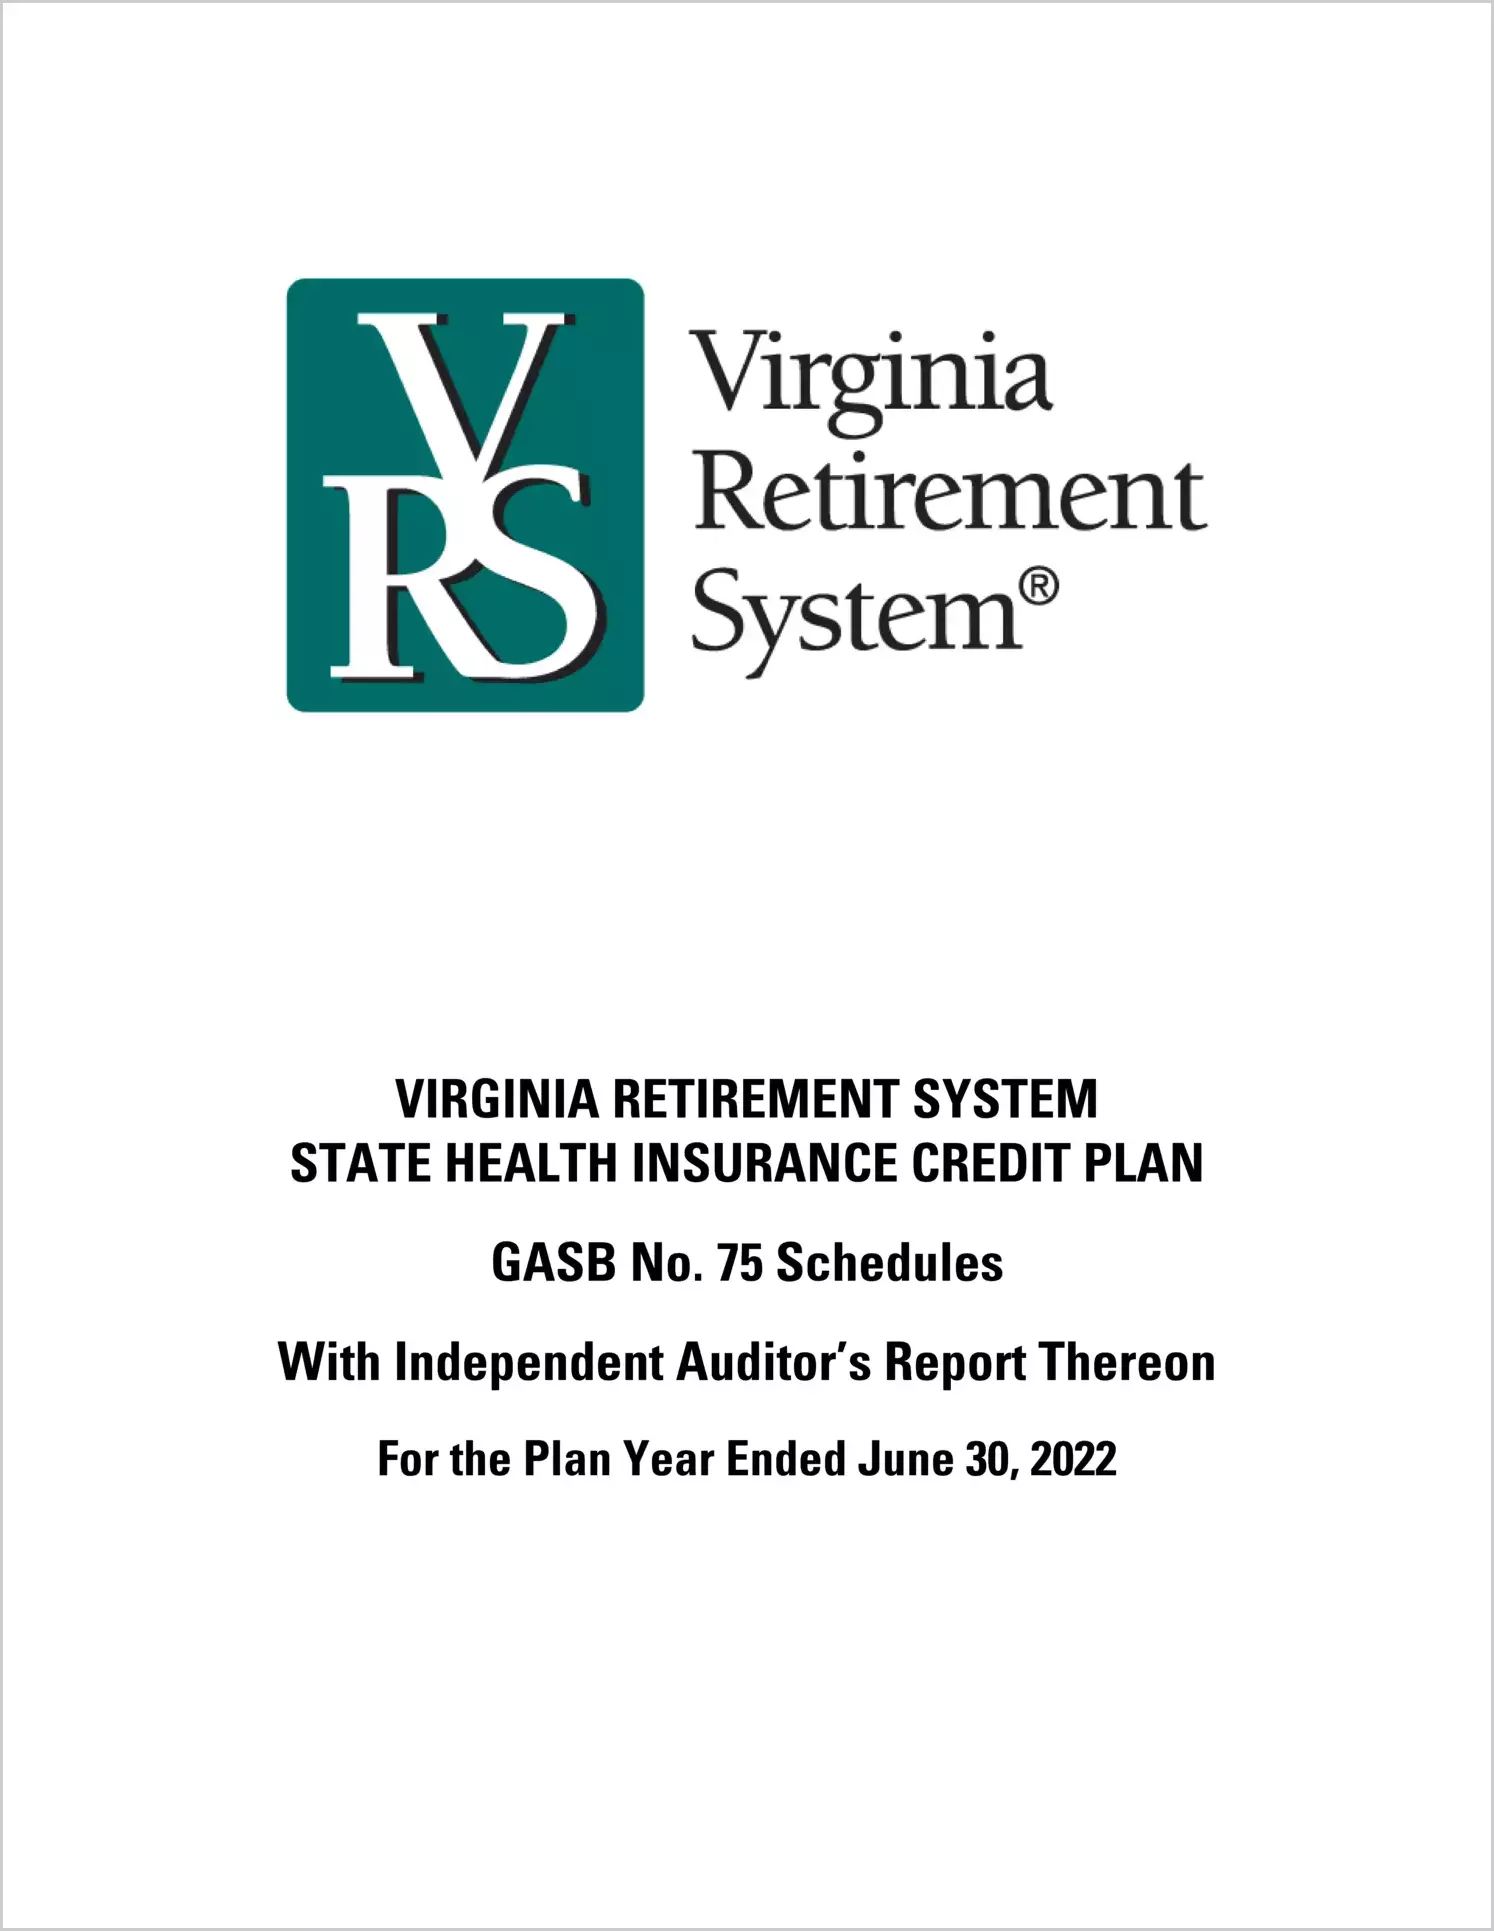 GASB 75 Schedules - Virginia Retirement System State Health Insurance Credit Plan for the year ended June 30, 2022